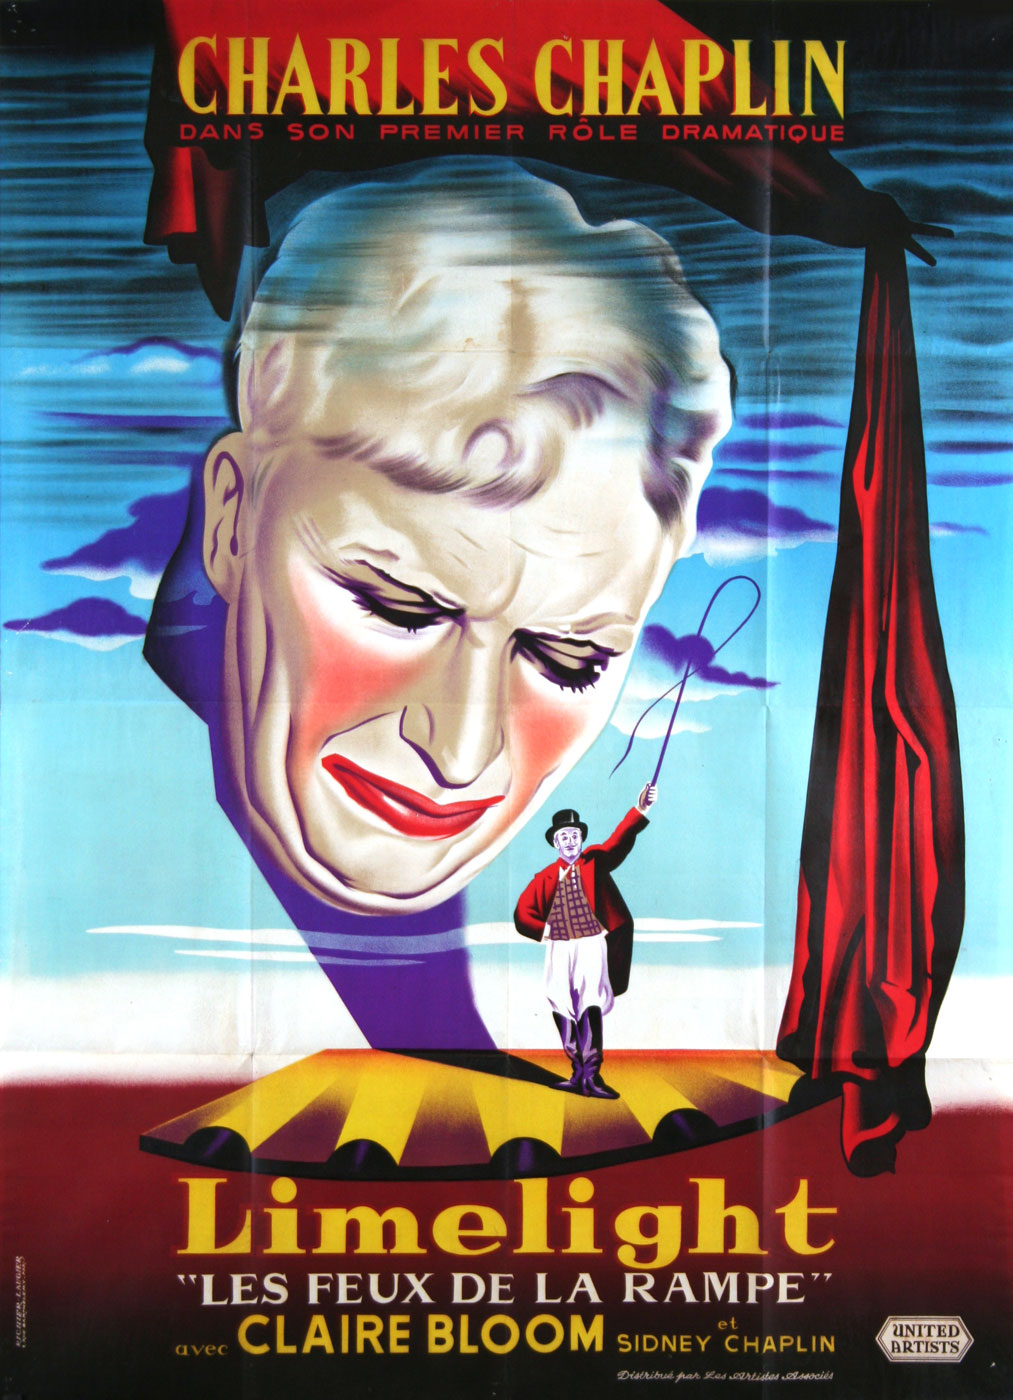 Limelight by Charles Chaplin (47 x 63 in)